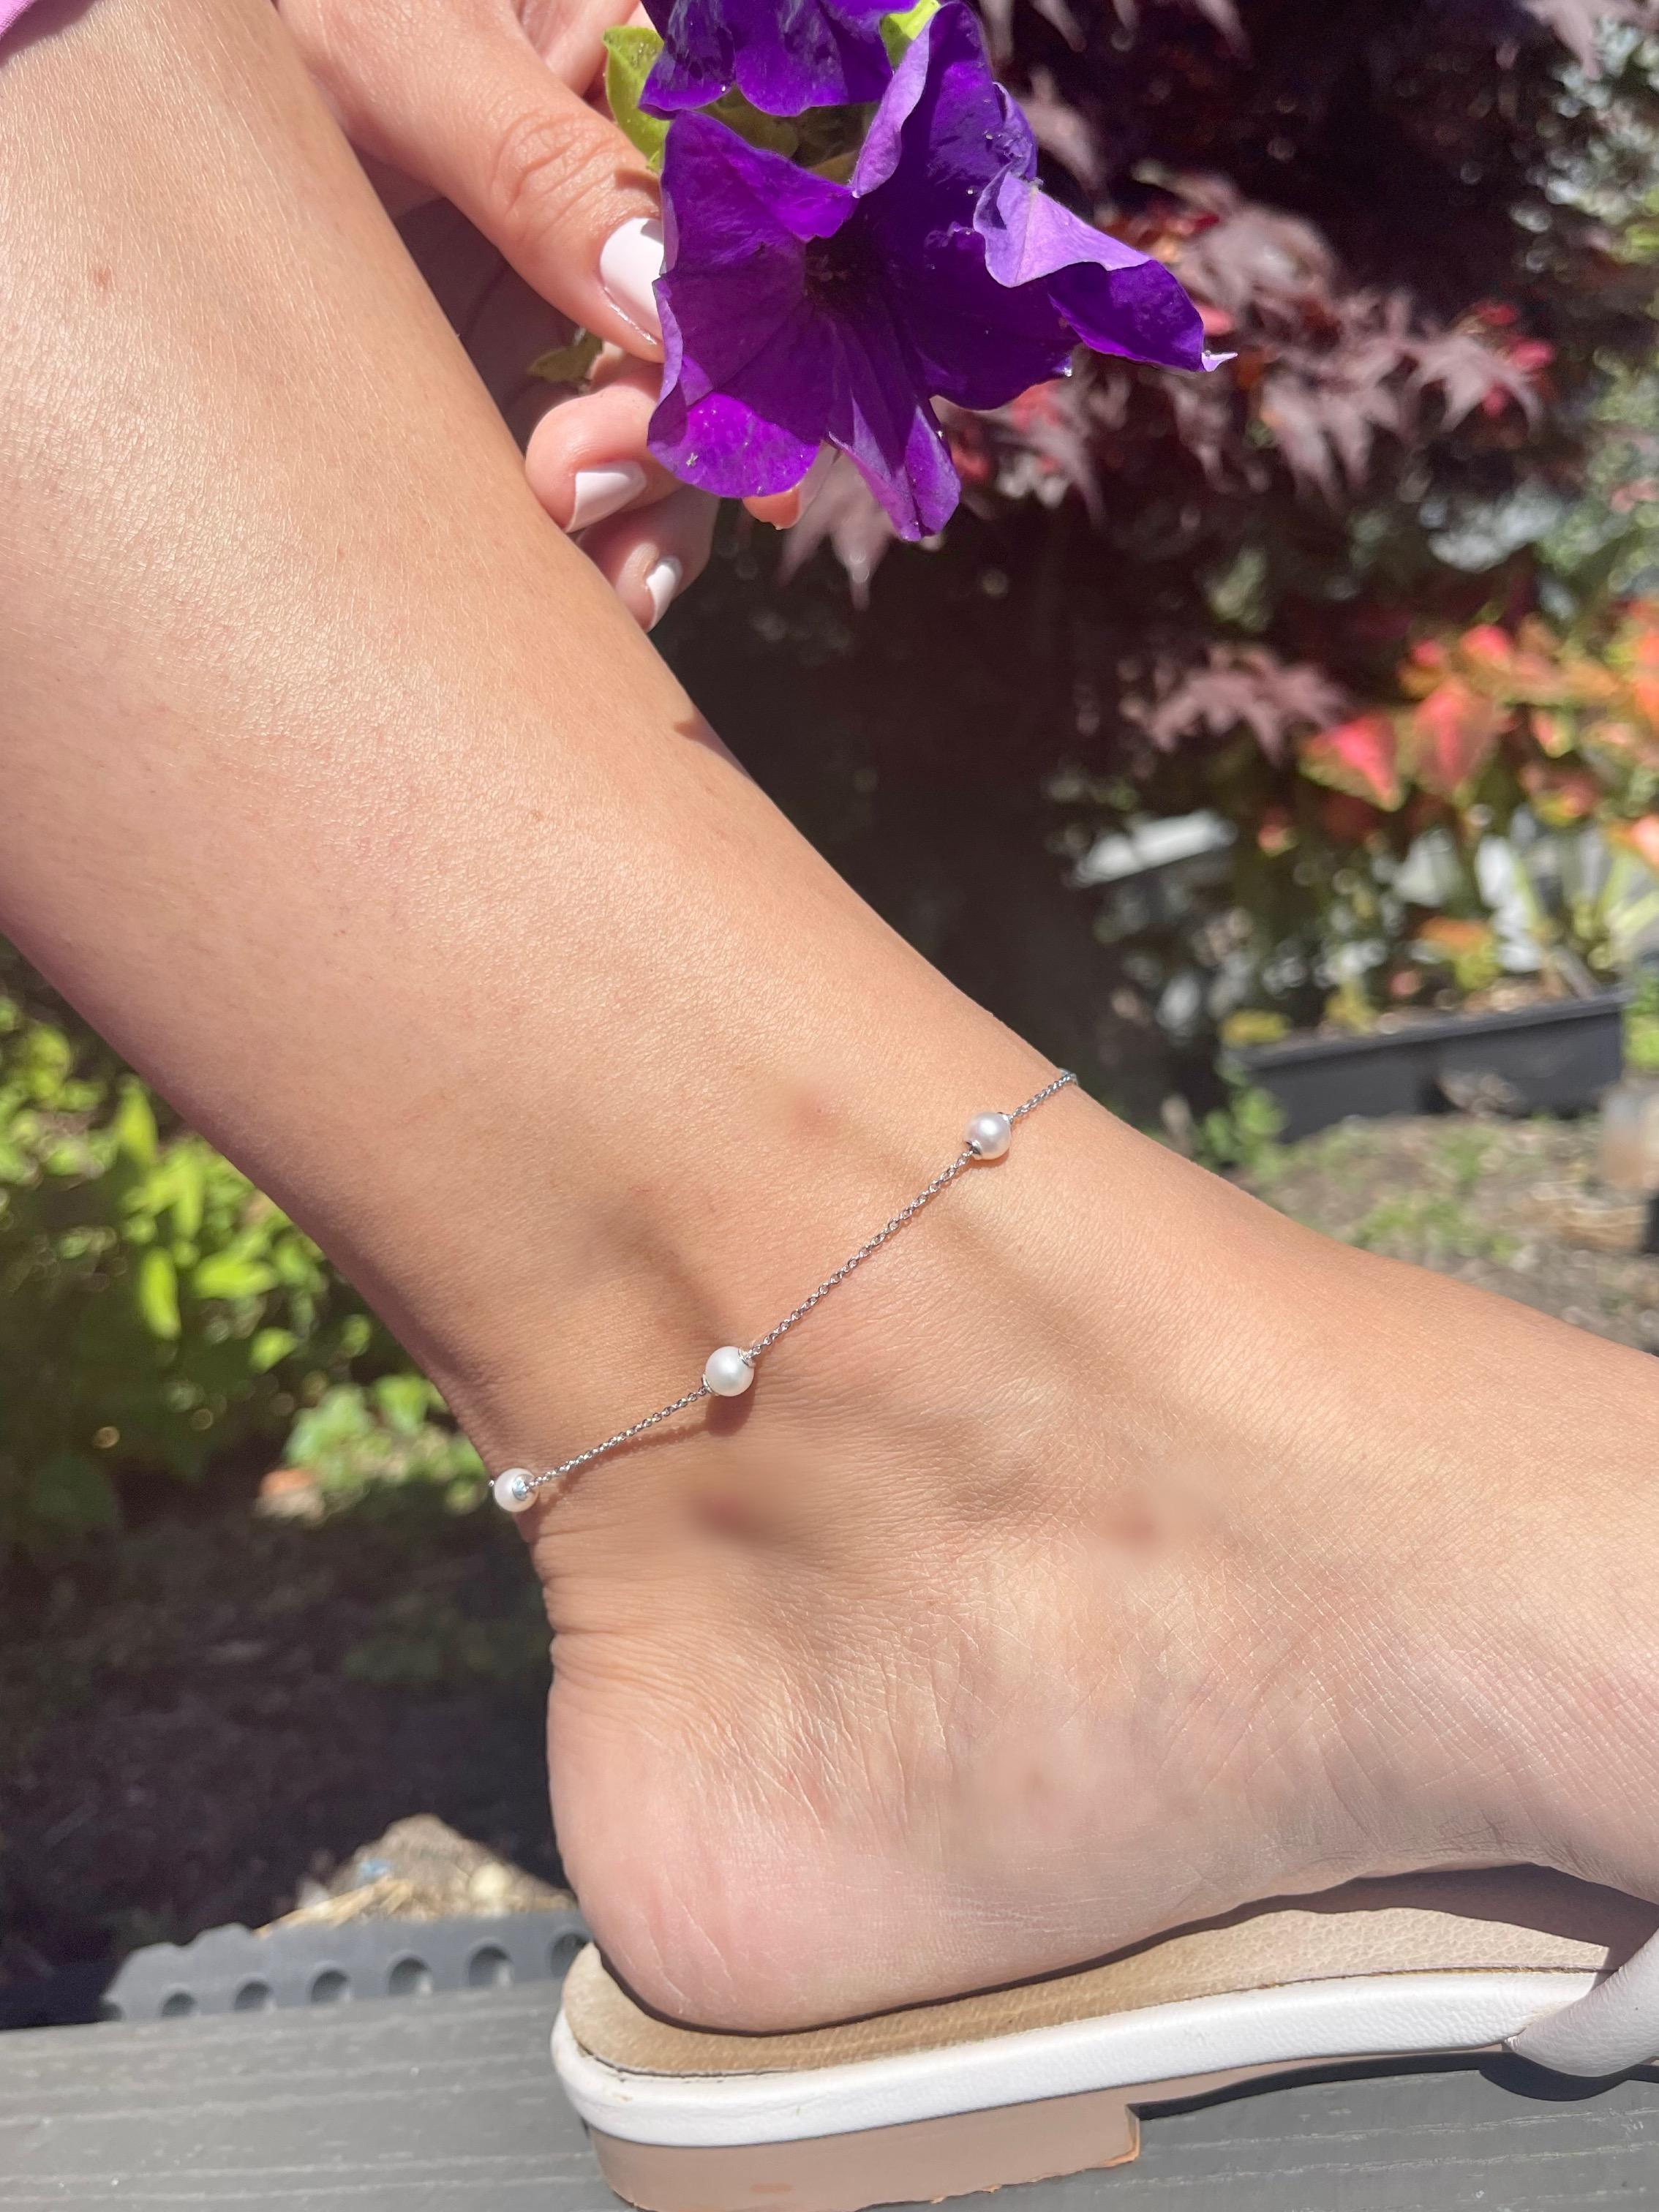 Your summer must-have is here! This adjustable anklet features 5-5.5mm Freshwater pearls dangling from a .925 Sterling Silver chain. Add some glam to your outfit with this chic anklet. 

